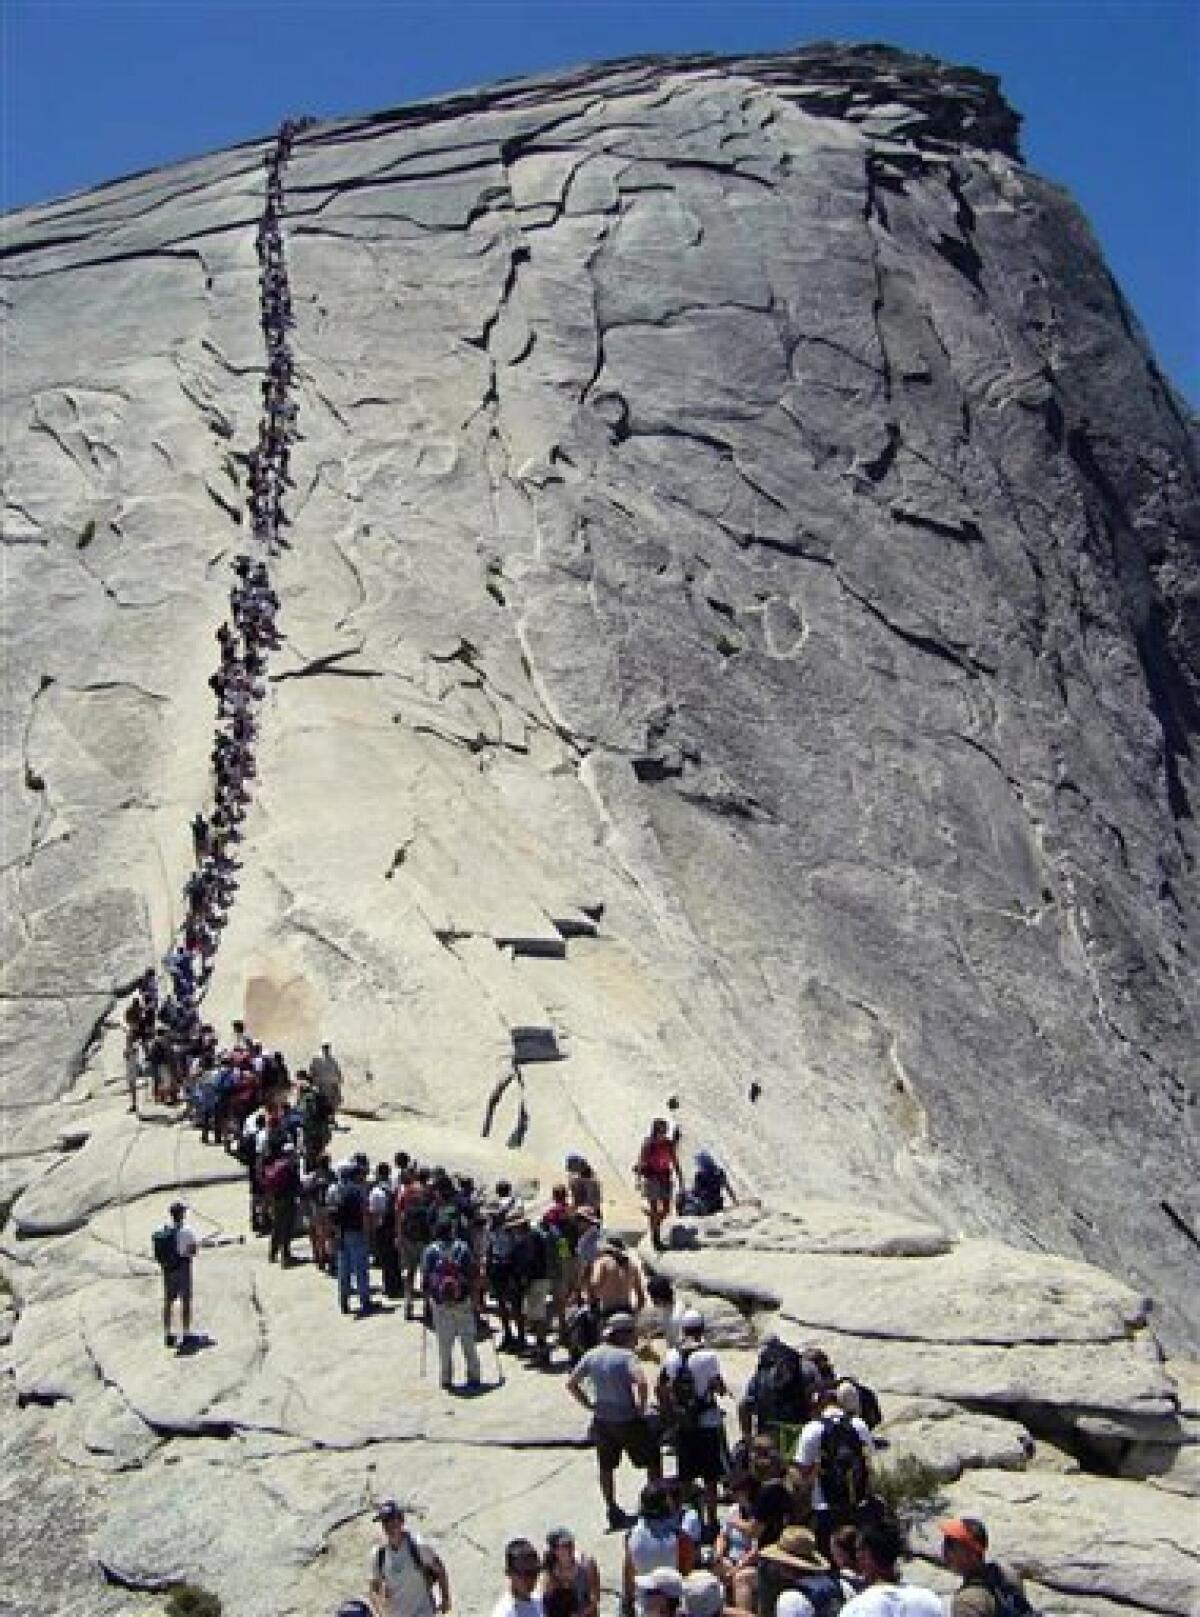 Yosemite plan means fewer hikers on Half Dome - The San Diego